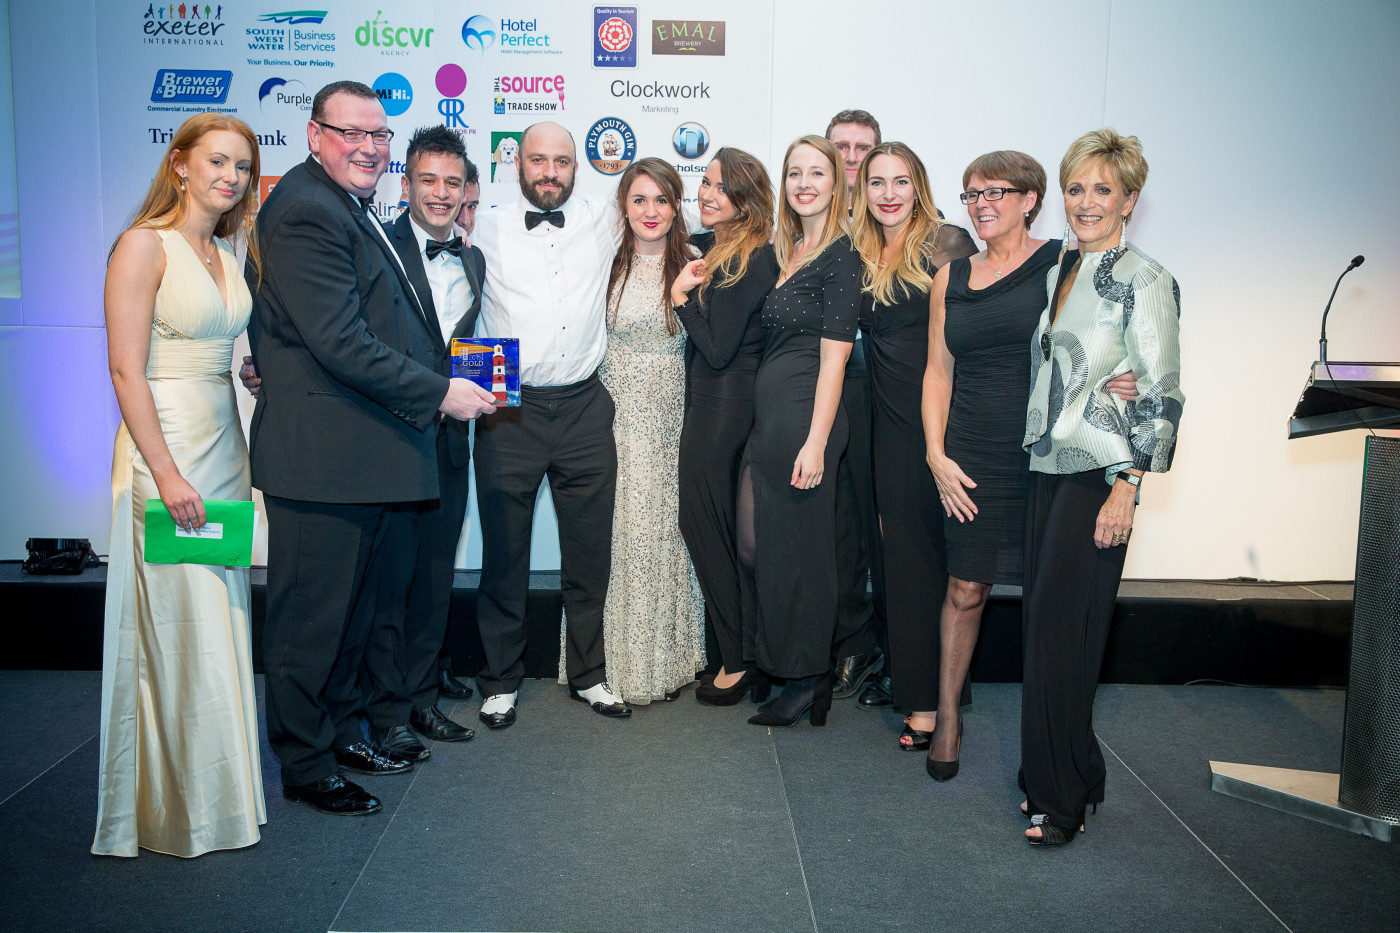 Salcombe Harbour Hotel & Spa awarded Large Hotel of the Year